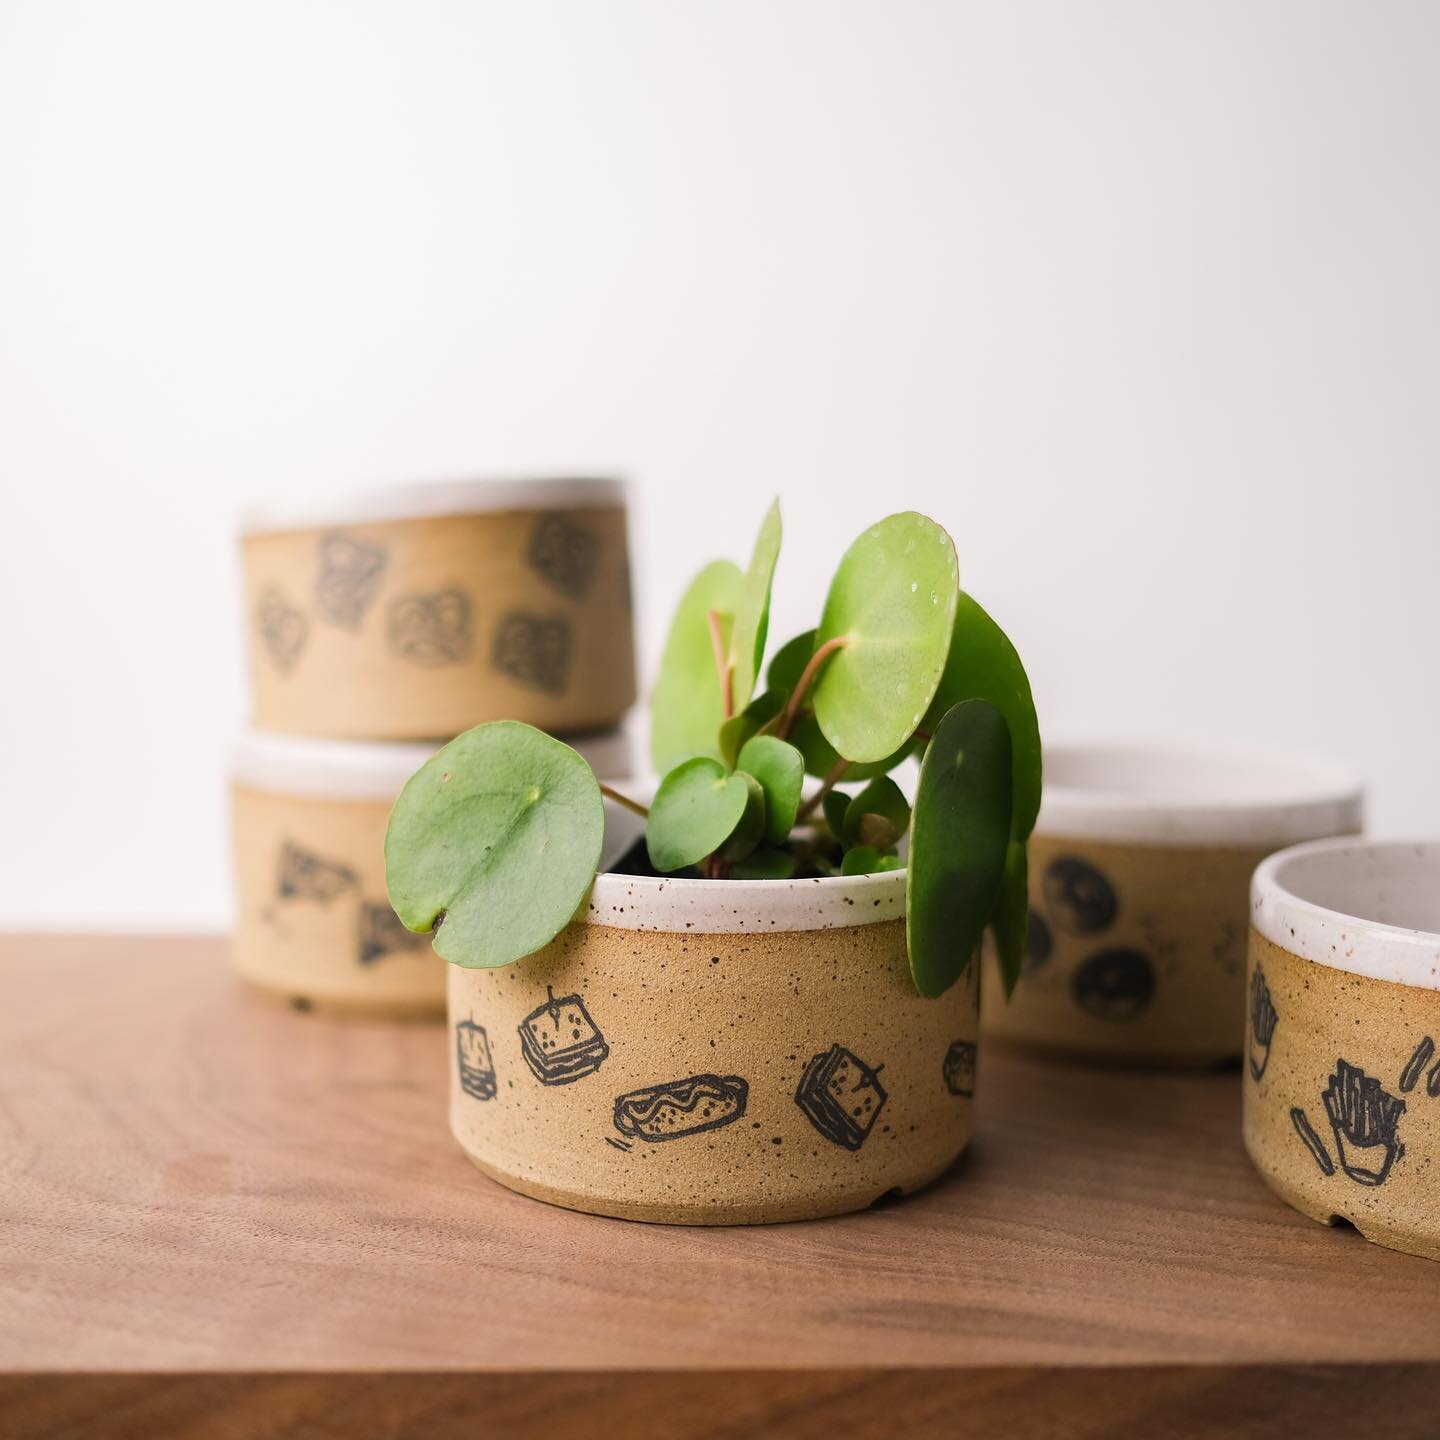 Pushing a small update onto the etsy shop, includes this batch of test doodle pots 🌿

#potterymaking #陶瓷 #handmadeceramics #手作 #makers #陶藝 #陶芸 #ceramicdesign #potterydesign #etsyshop #pileapeperomioides #pilea #ceramicplanter